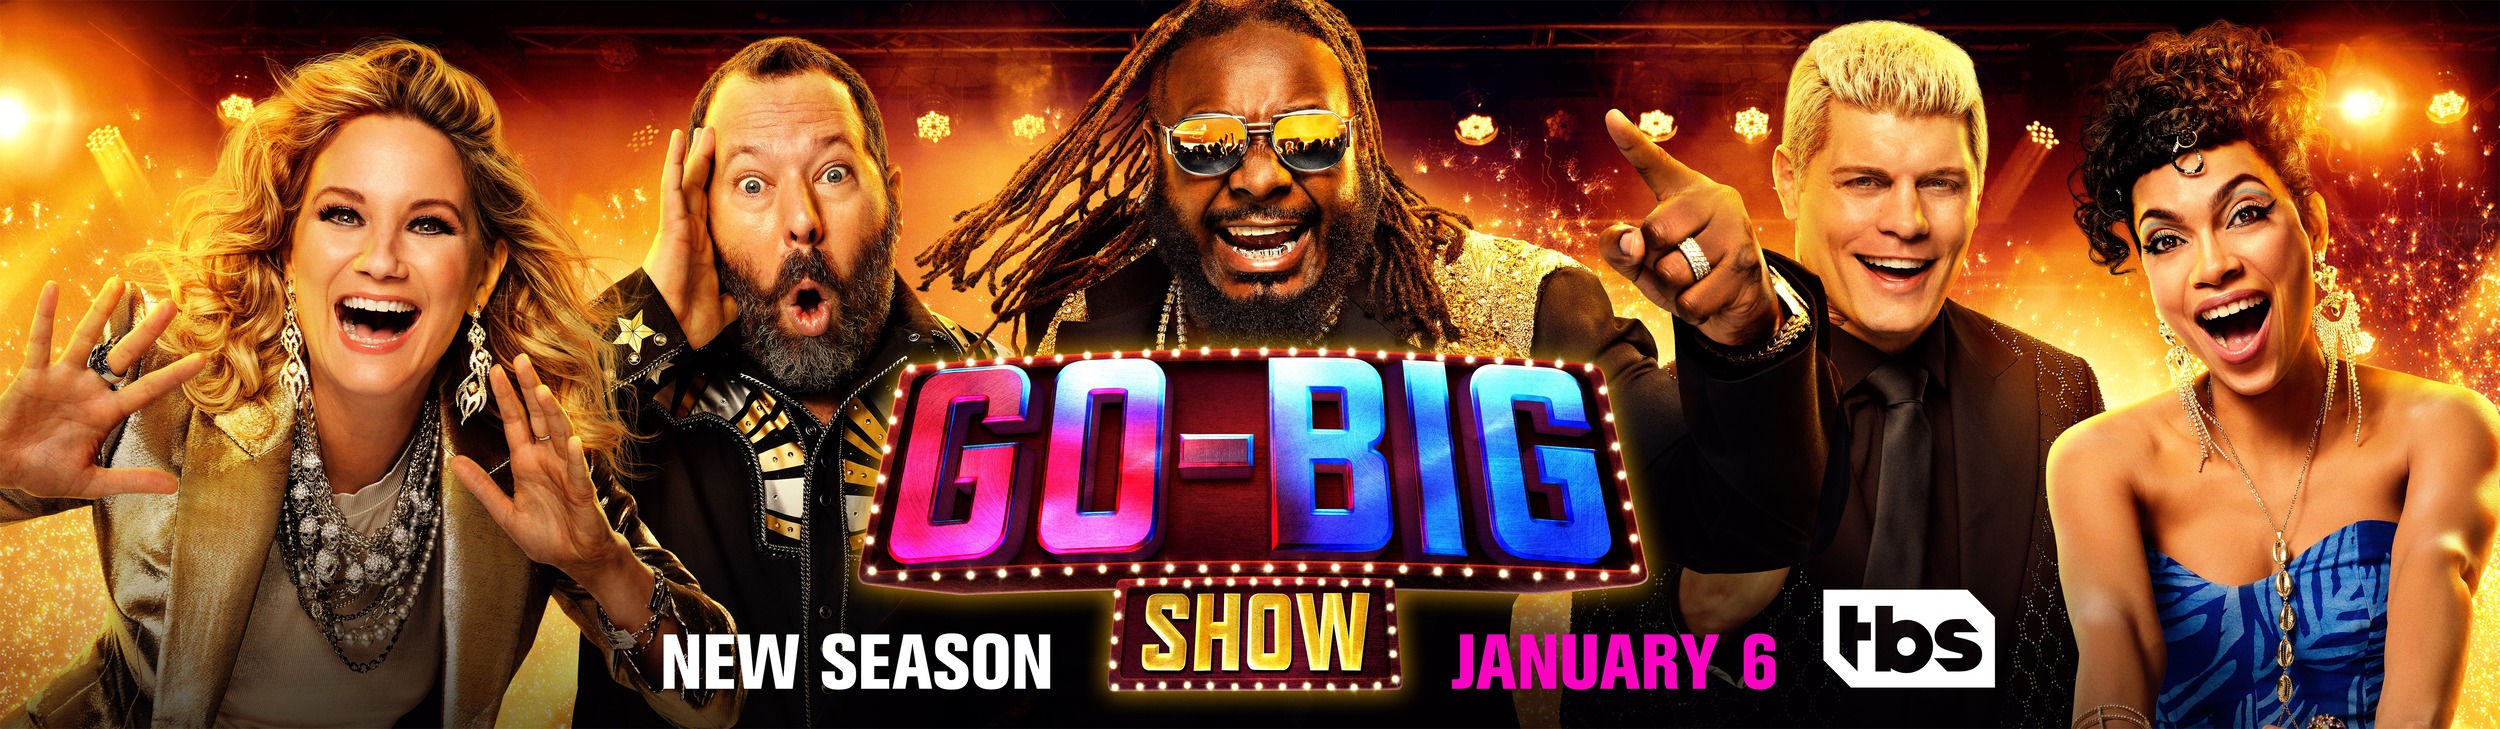 Mega Sized Movie Poster Image for Go-Big Show (#5 of 5)